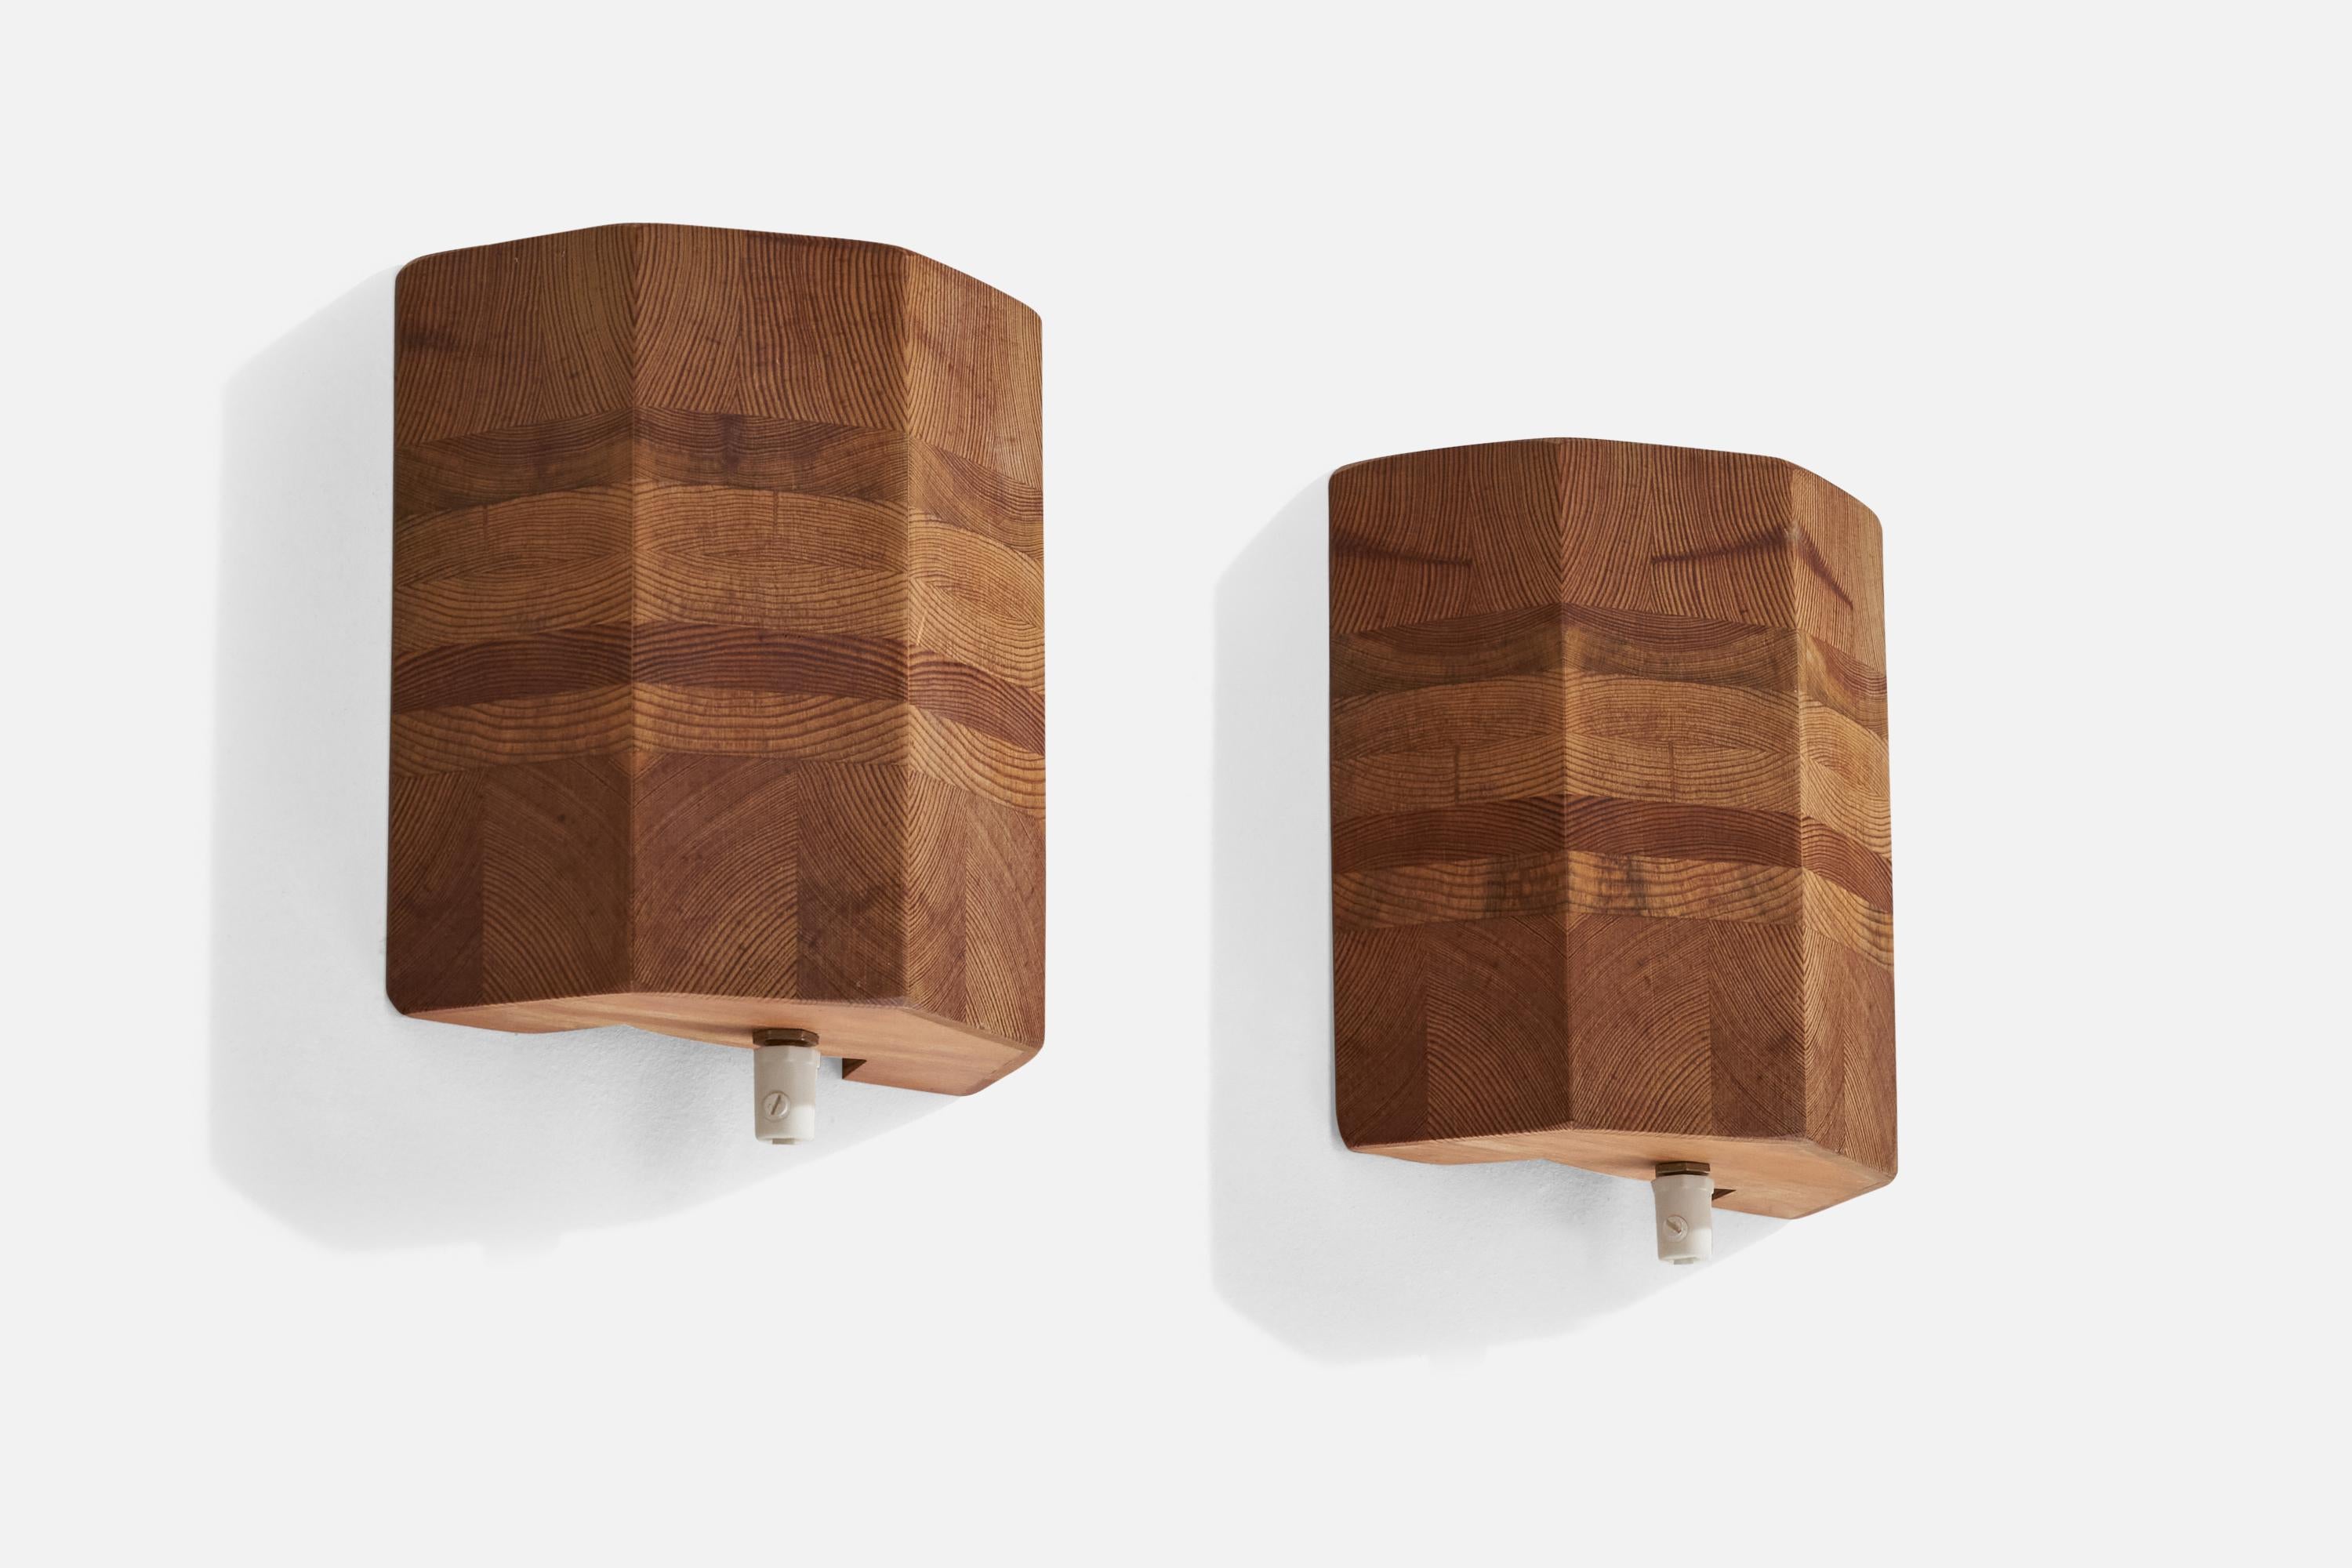 A pair of pine wall lights designed and produced in Sweden, 1970s.

Overall Dimensions (inches): 8.5” H x 6.75” W x 2.24” D
Back Plate Dimensions (inches):N/A
Bulb Specifications: E-14 Bulb
Number of Sockets: 2
All lighting will be converted for US